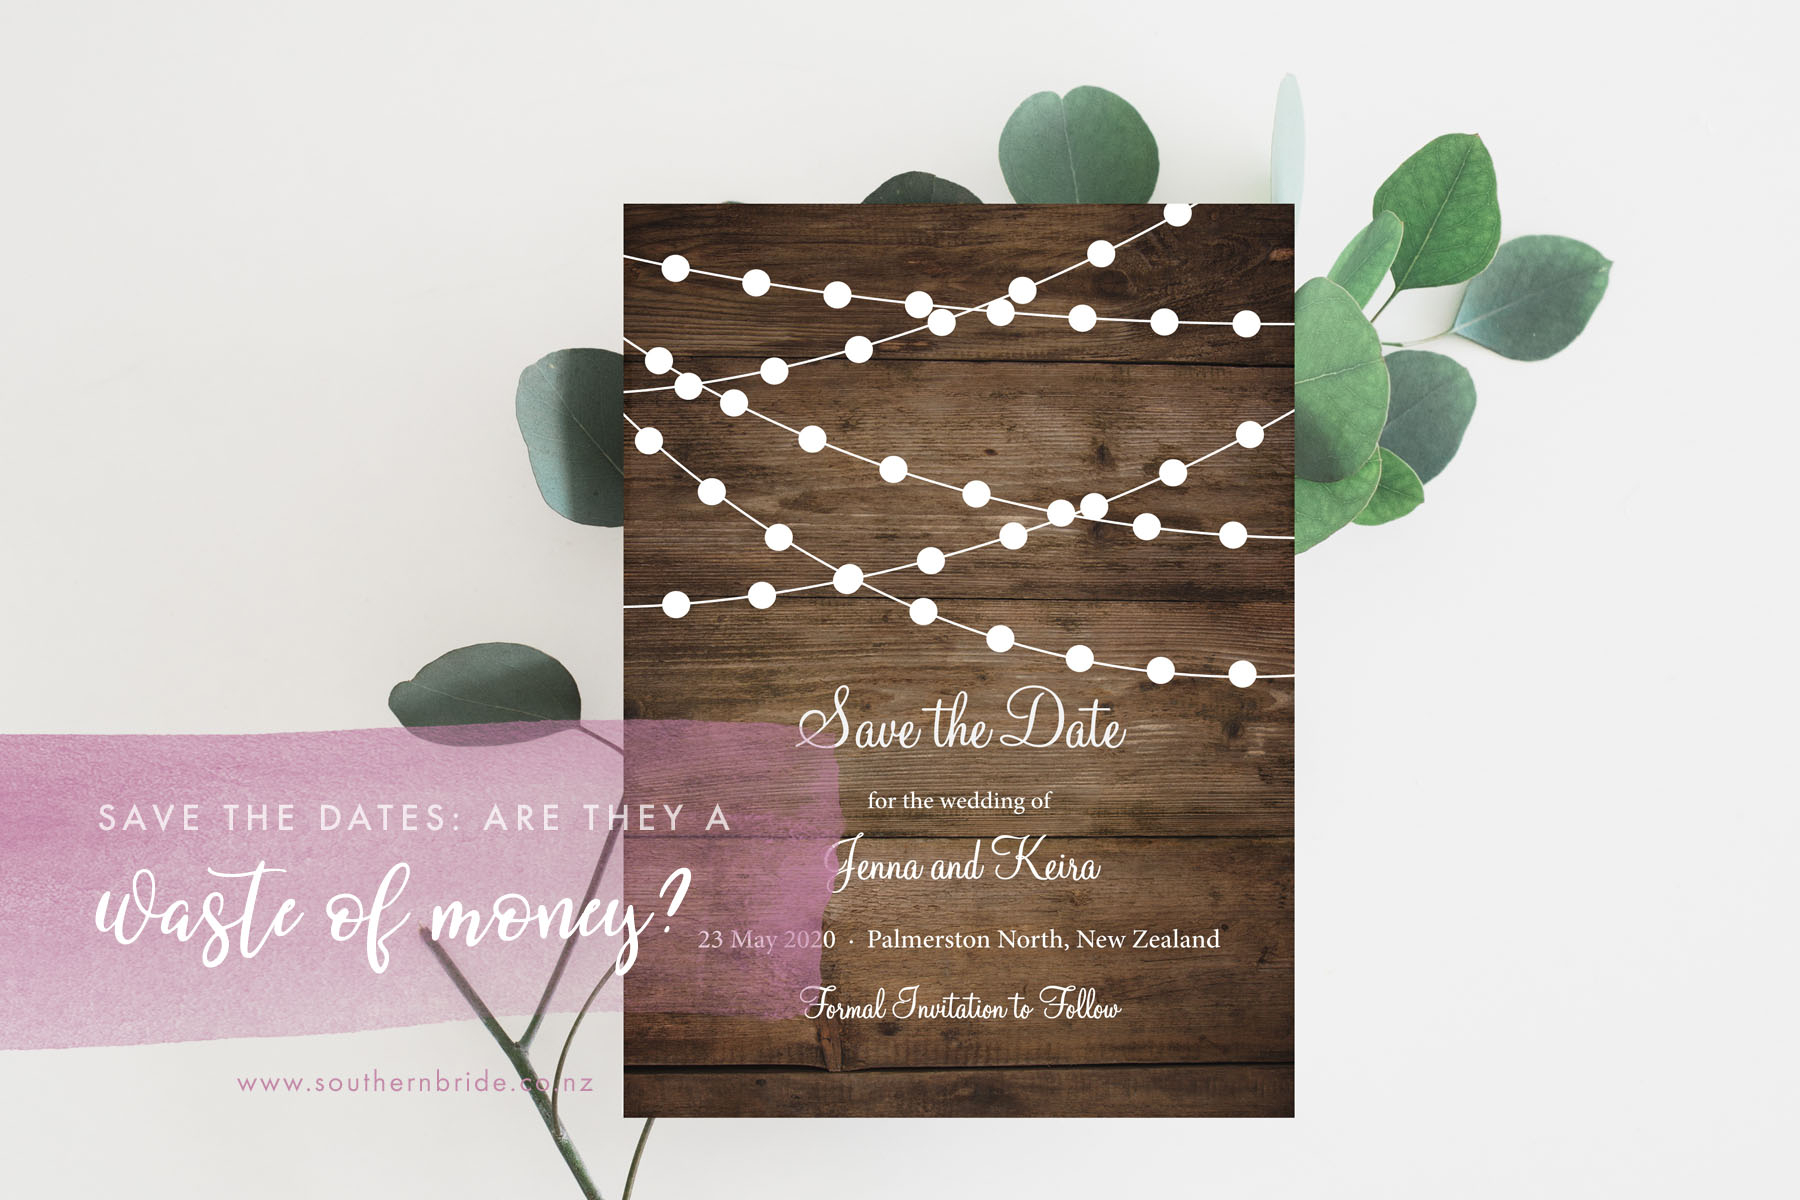 10 Stylish Pinterest Save The Date Ideas save the dates a waste of money or a must have southern bride 2024